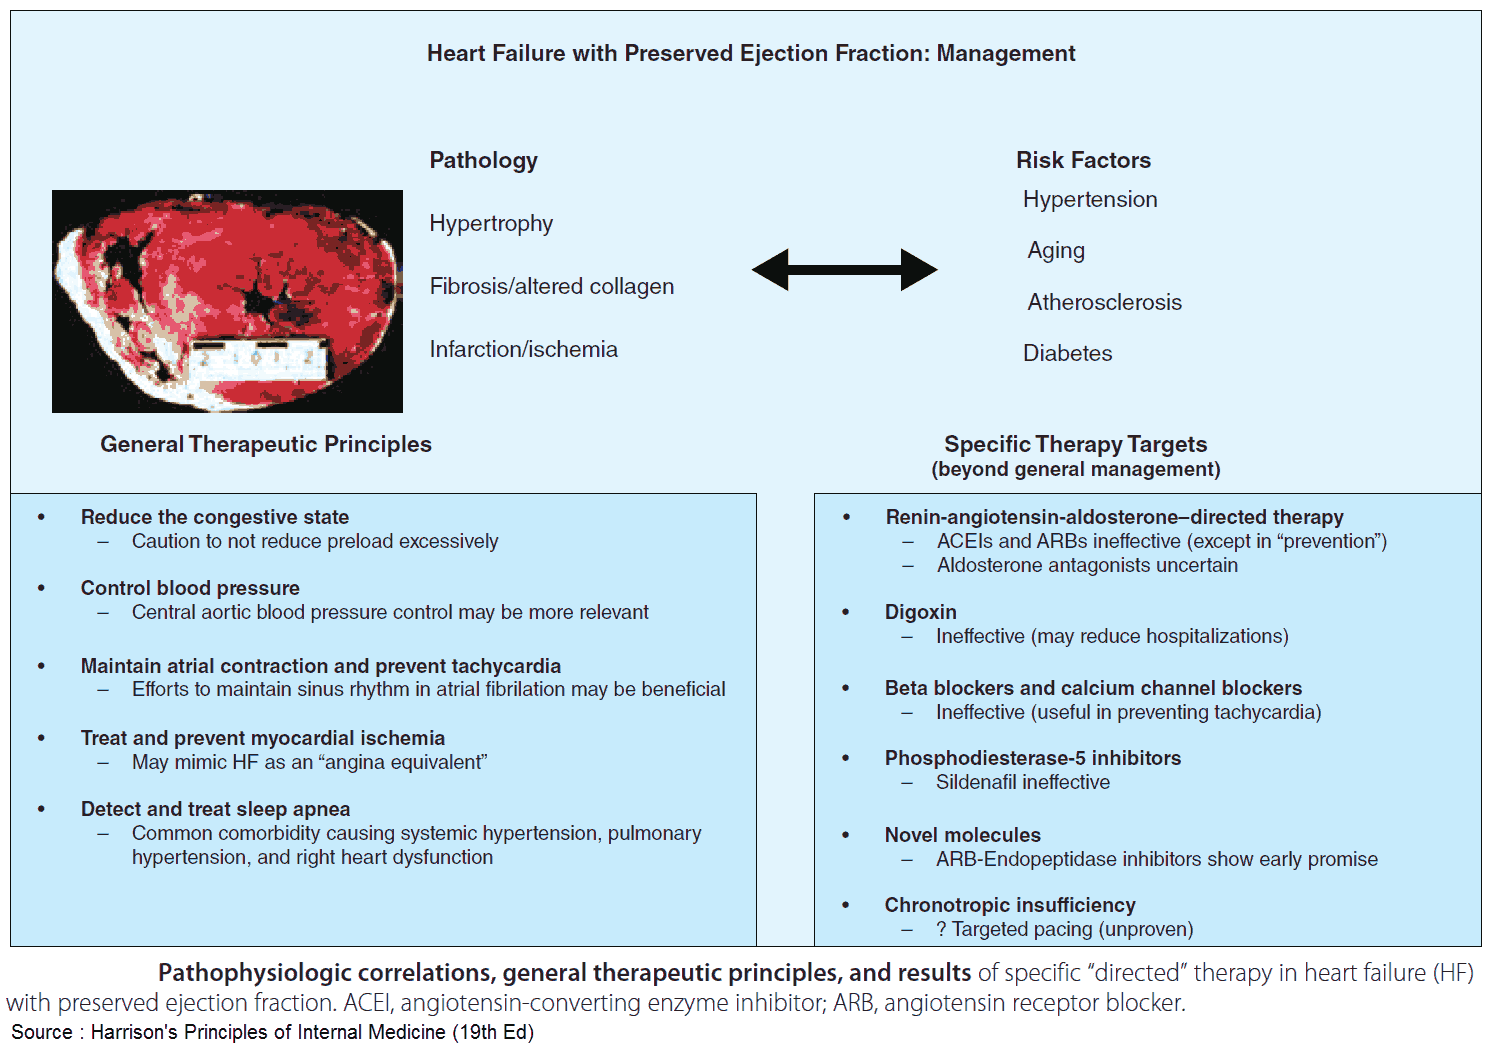 Management of Heart Failure with Preserved Ejection Fraction (HFpEF)